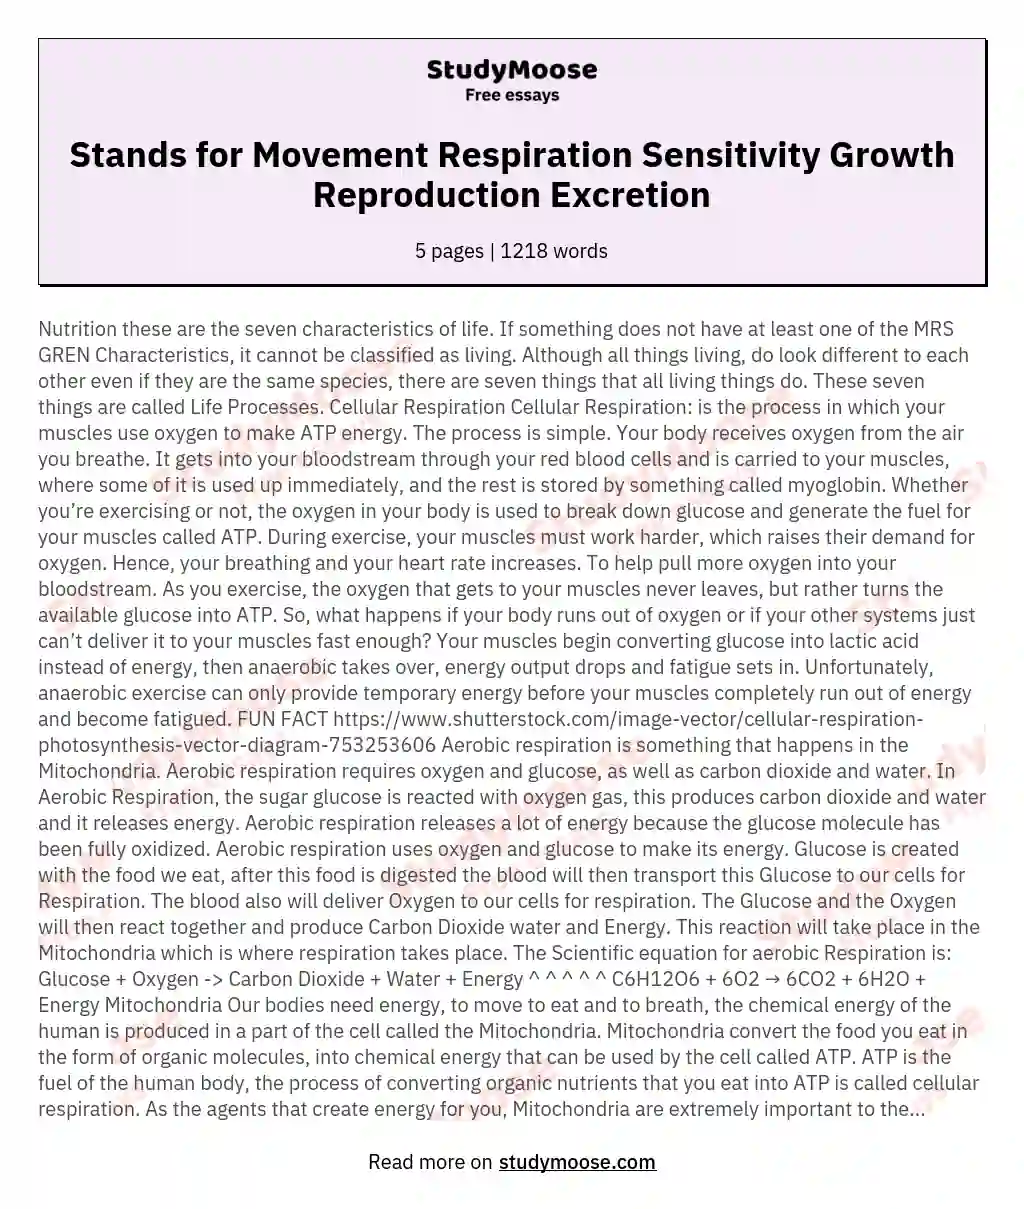 Stands for Movement Respiration Sensitivity Growth Reproduction Excretion essay